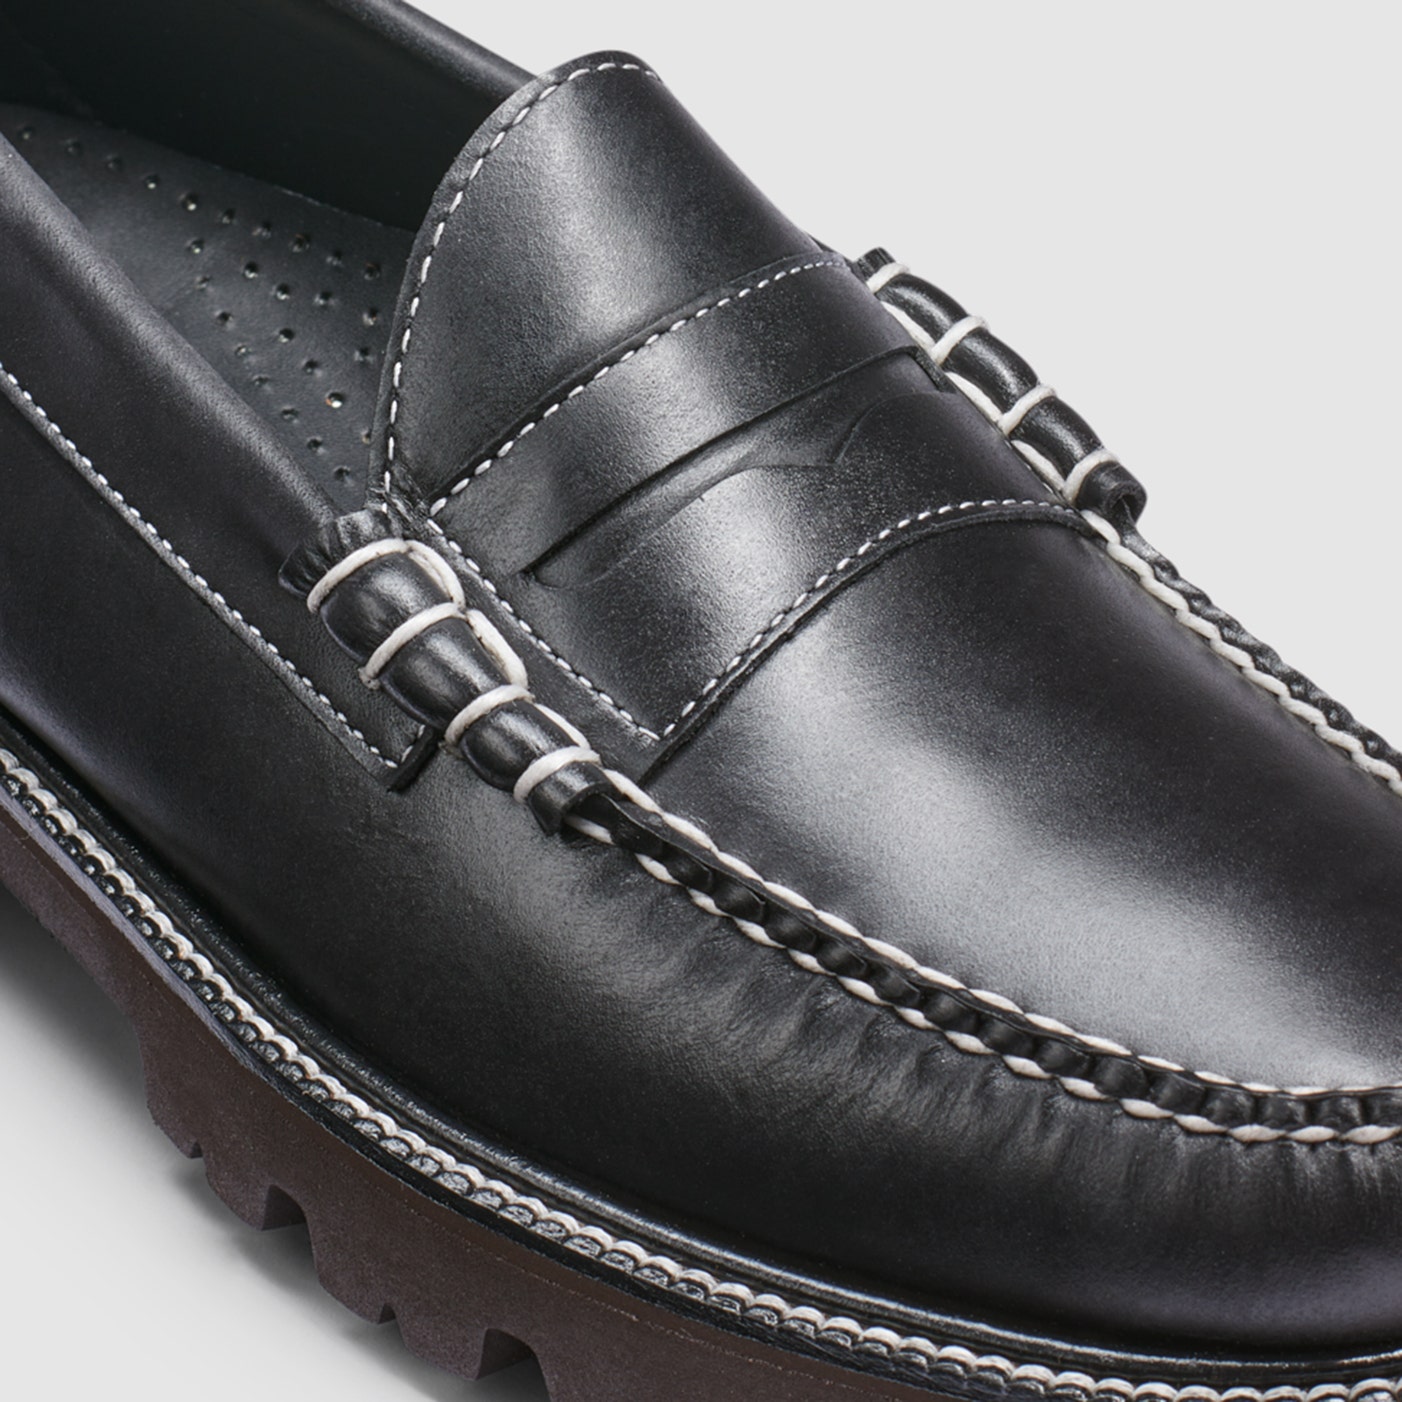 G.H. Bass Larson Softy Super Lug Weejuns Loafer in Black BAZ3W467 | Shop from eightywingold an official brand partner for G.H. Bass in Canada and US.